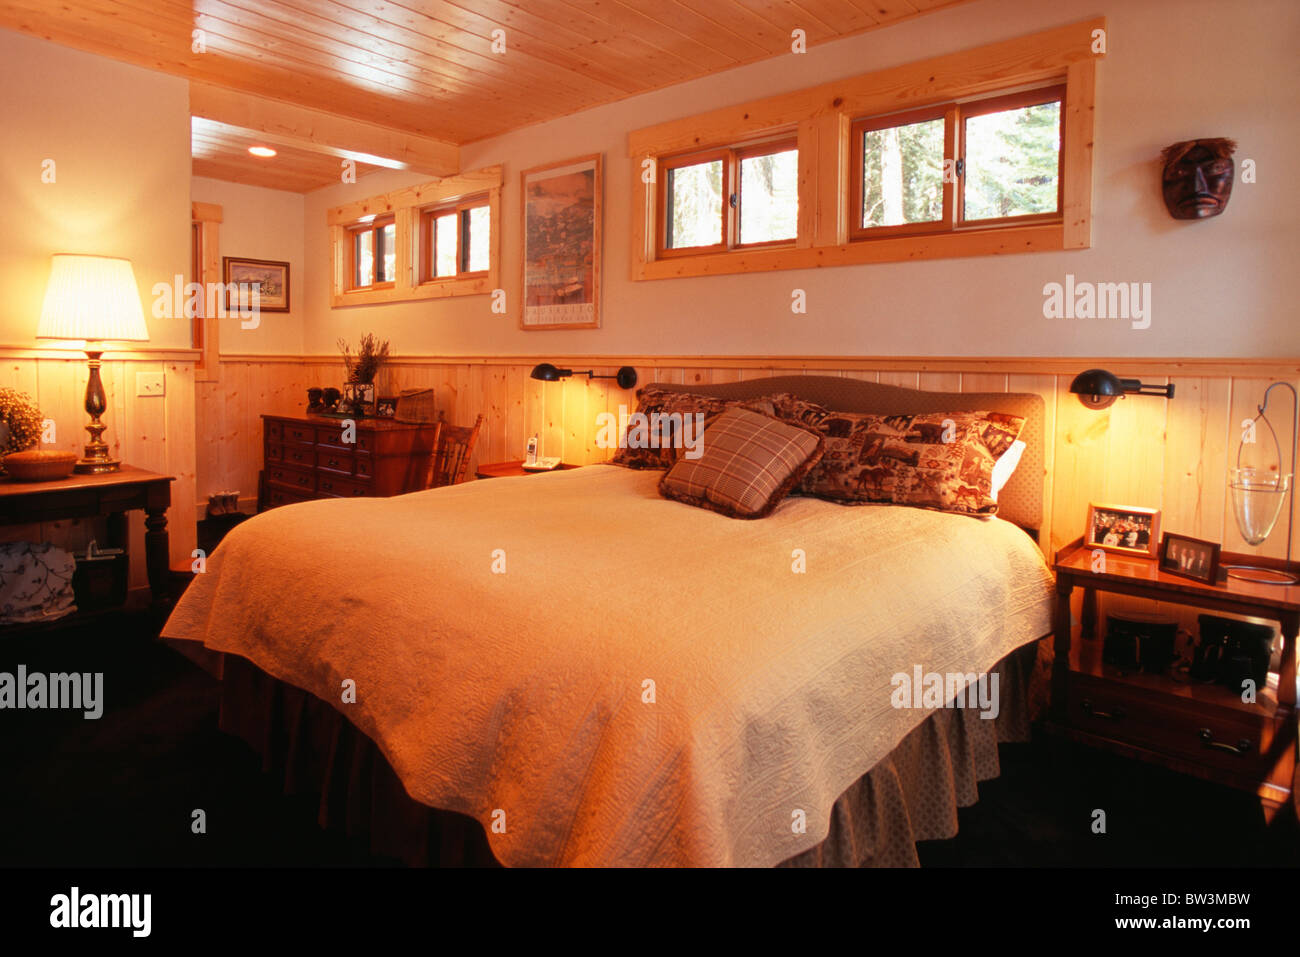 Bedroom in a home in California, USA. Stock Photo